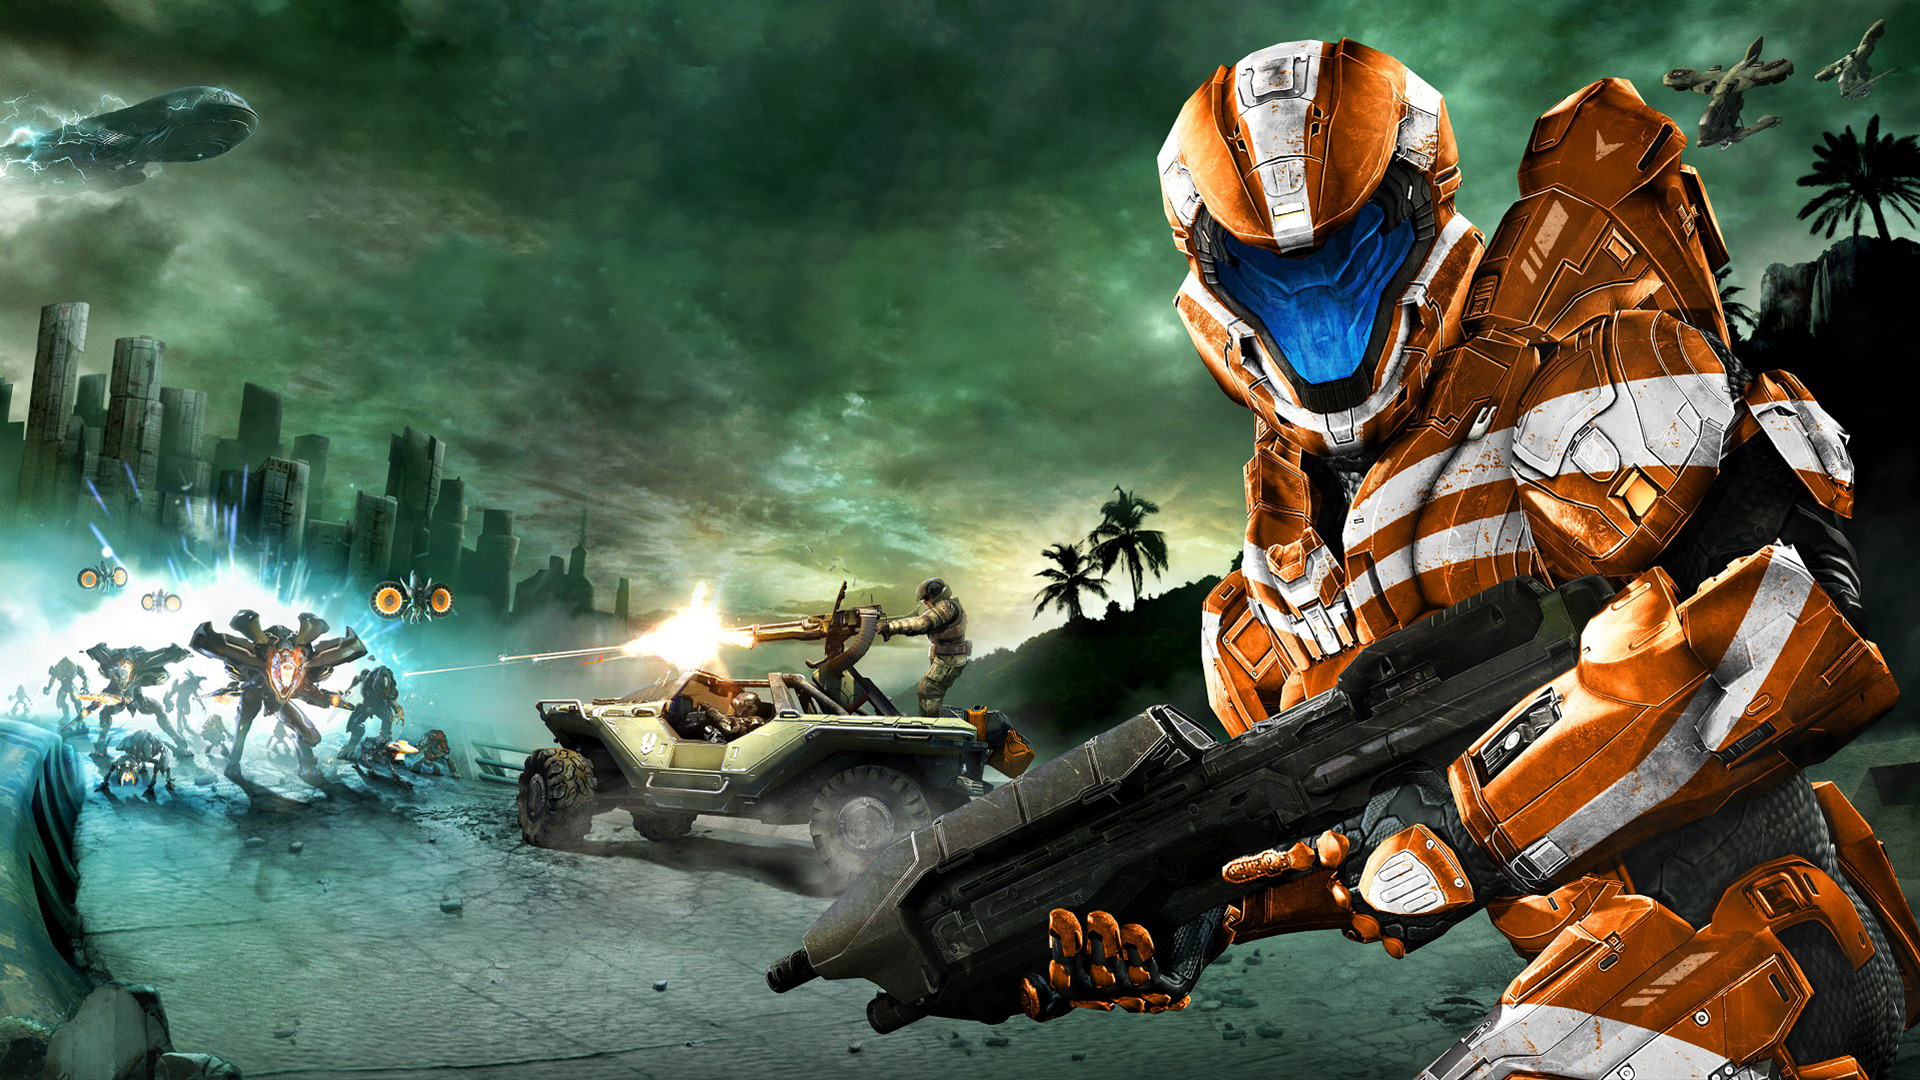 Halo games in order: Halo Spartan Strike art showing an orange Spartan with a blue visor and white stripes.